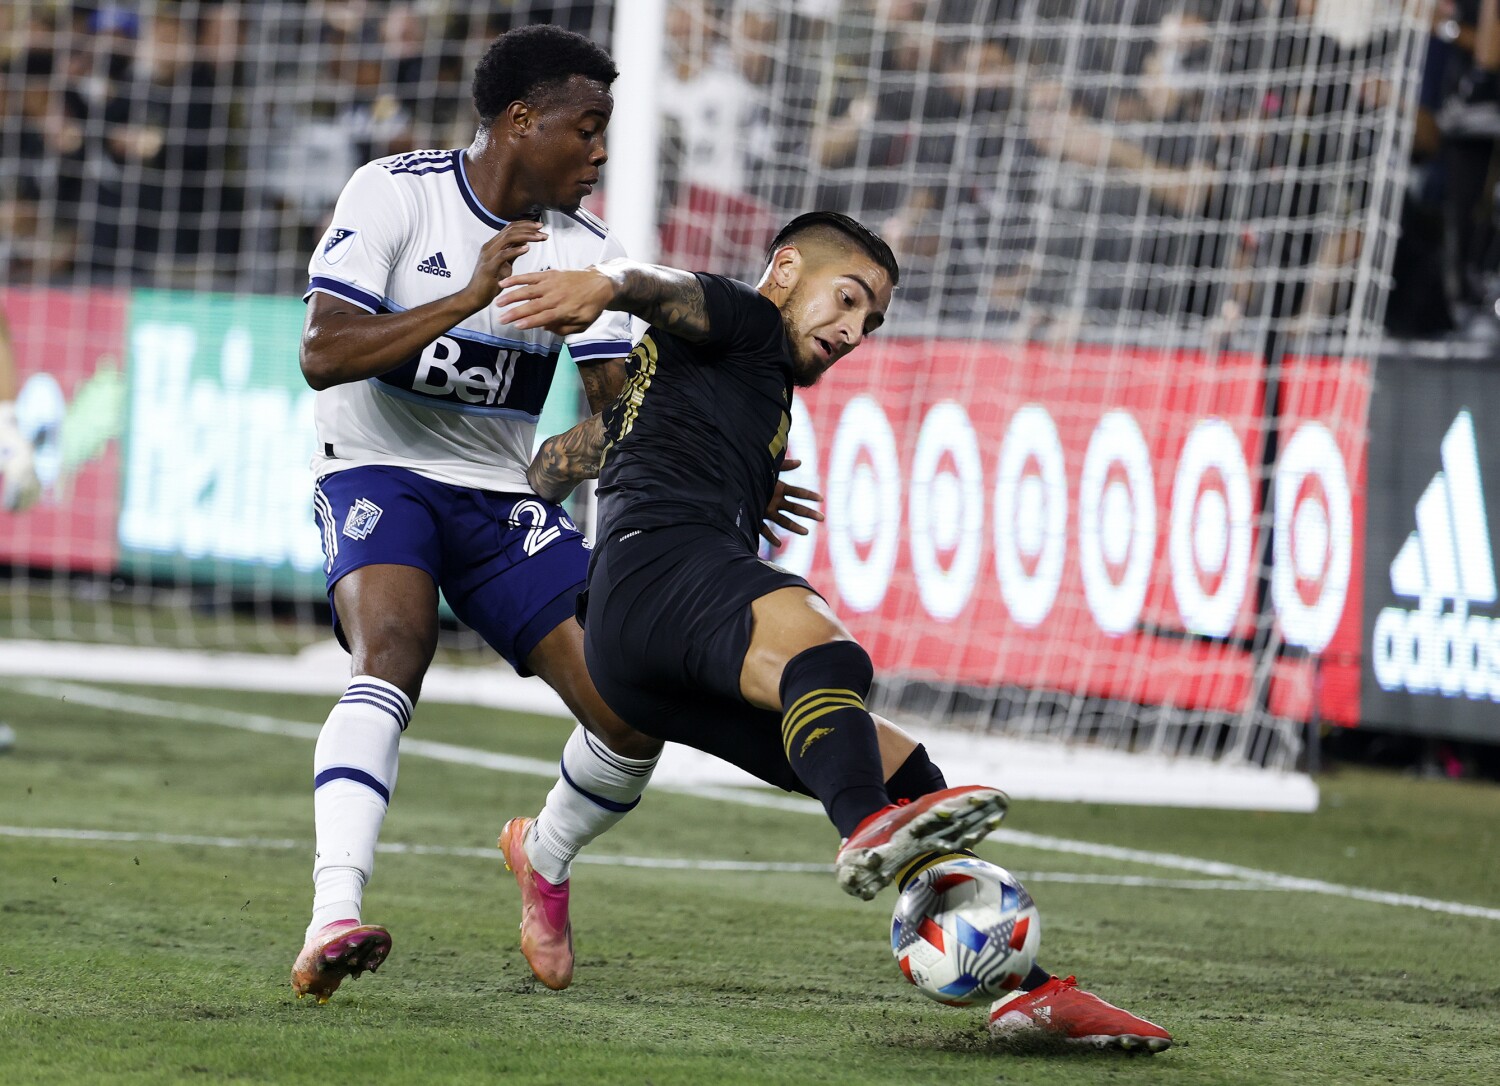 LAFC's playoff hopes dealt a blow after draw with Whitecaps